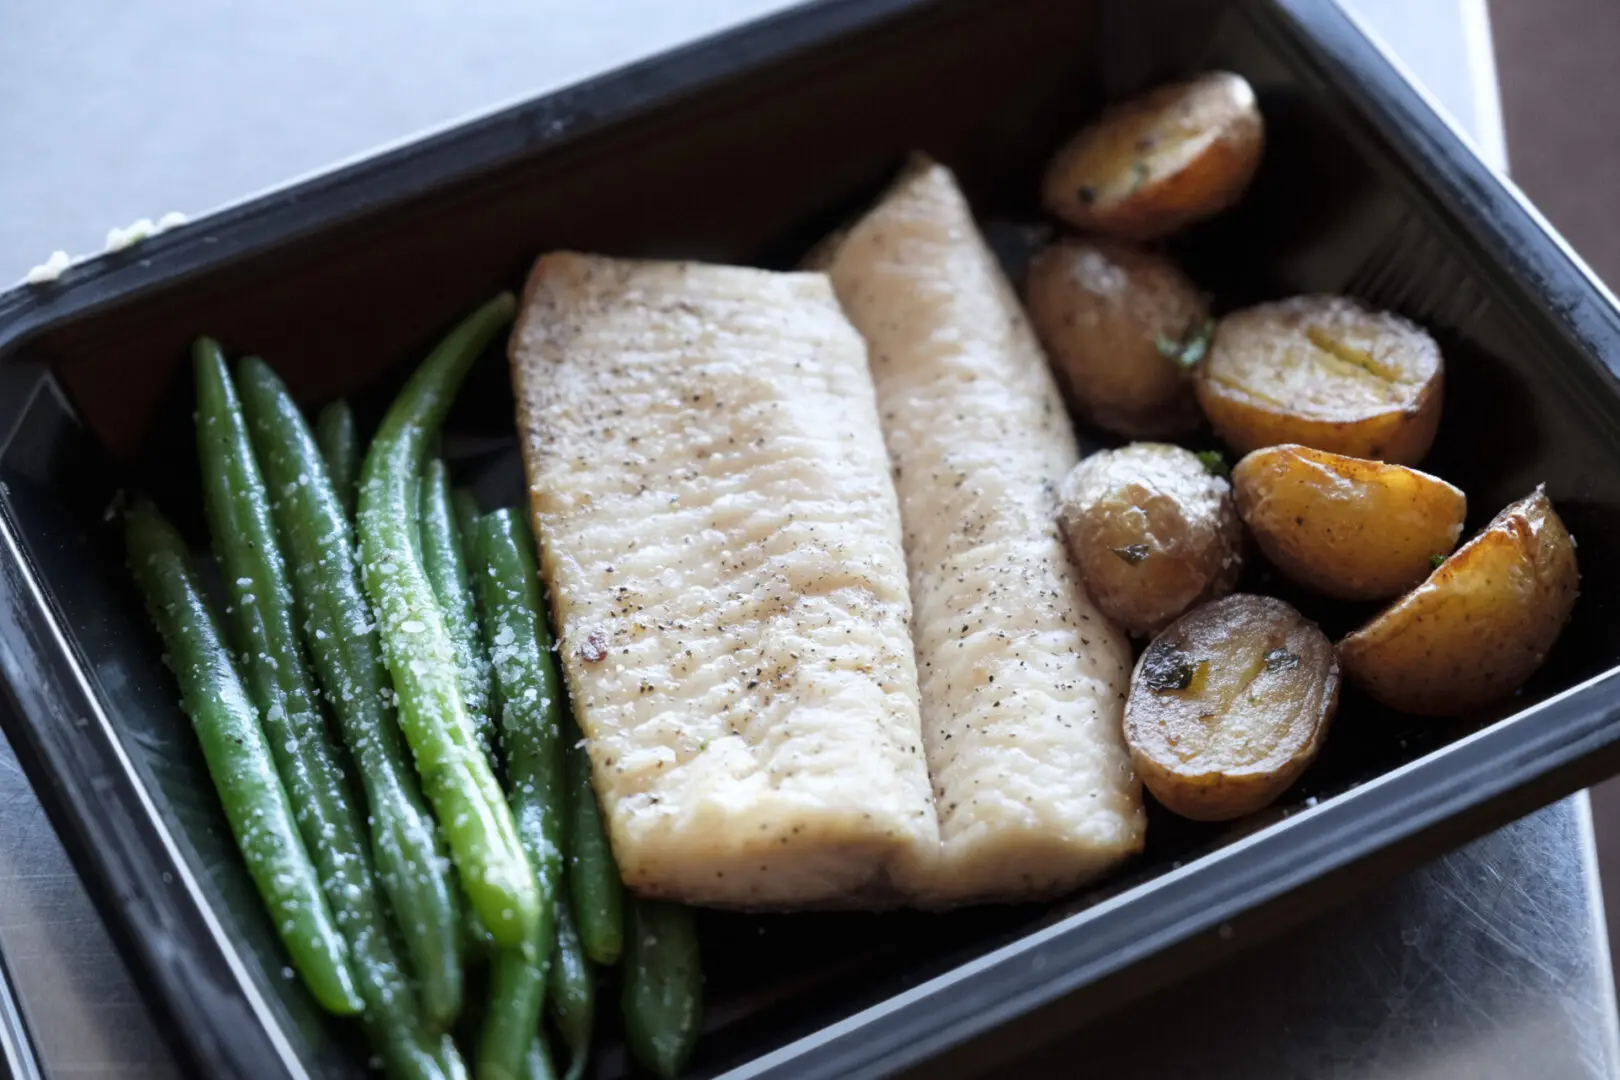 A tray of food with fish, potatoes and green beans.